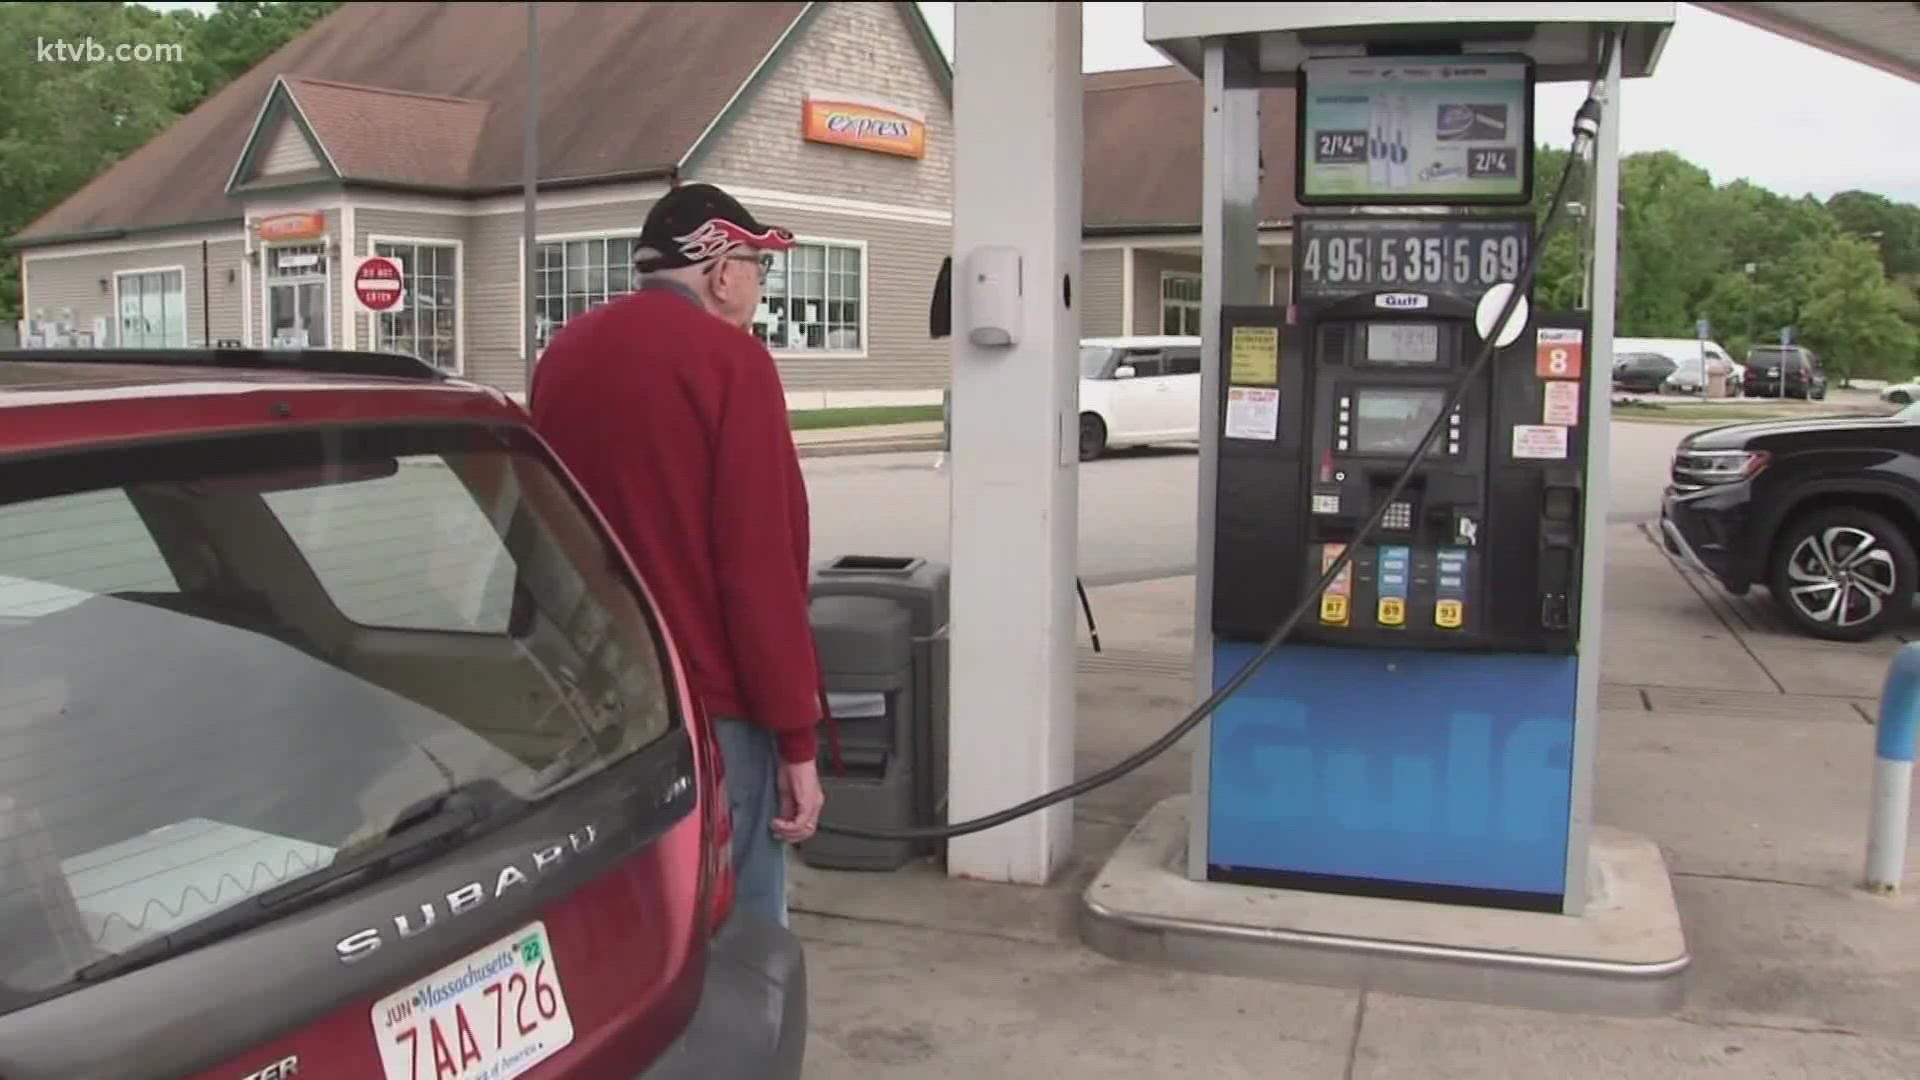 Idaho’s average gas price is $4.90 per gallon, 18 cents more than a week ago, 43 cents higher than a month ago, and $1.62 higher than a year ago, according to AAA.